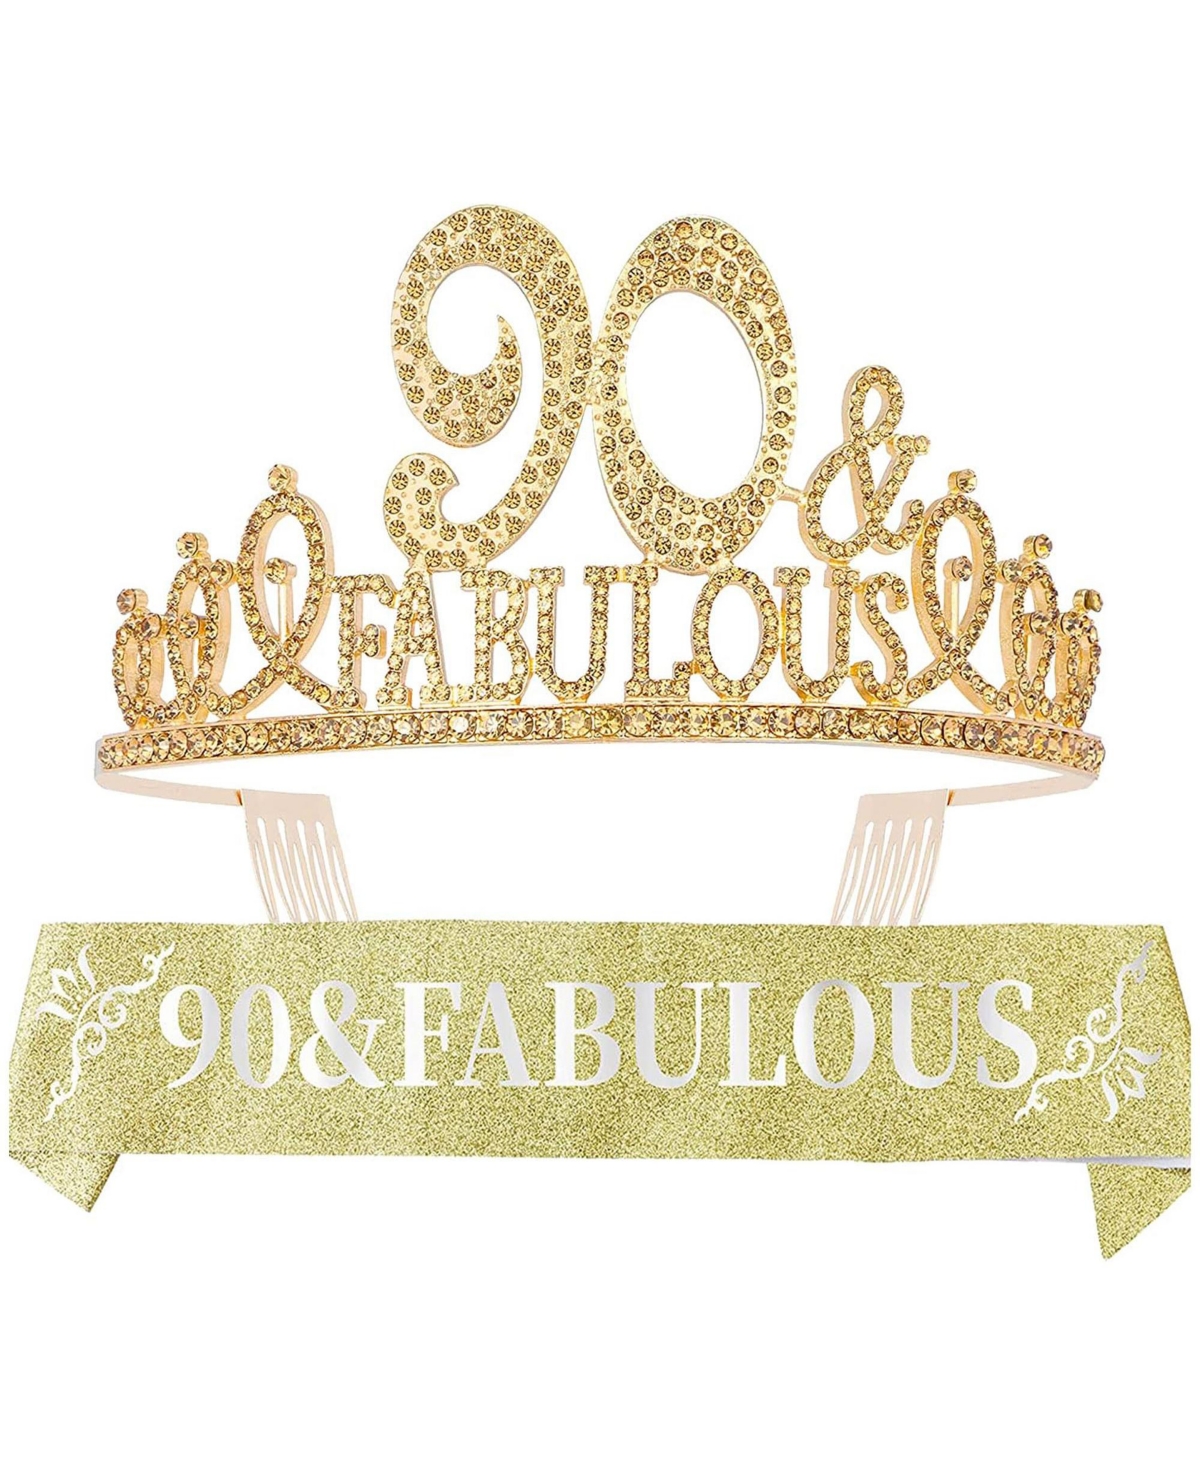 90th Birthday Gifts for Women, 90th Birthday Crown and Sash for Women, 90th Birthday Decorations for Women, 90th Birthday Party Favors, 90t